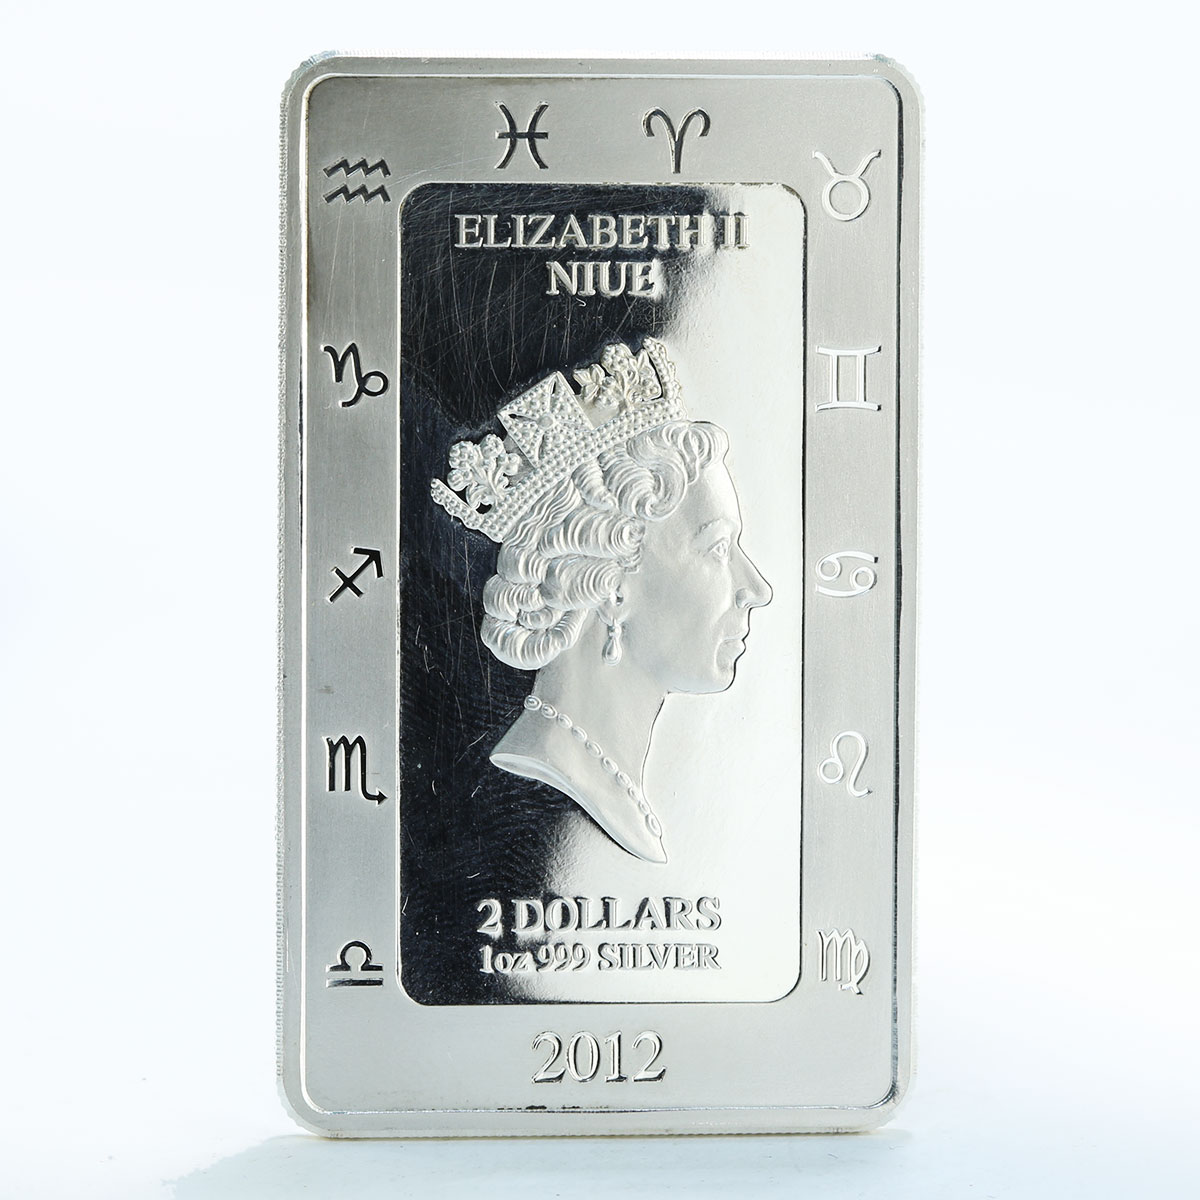 Niue 2 dollars Signs of the Zodiac Cancer silver colored 1 oz coin - ingot 2012